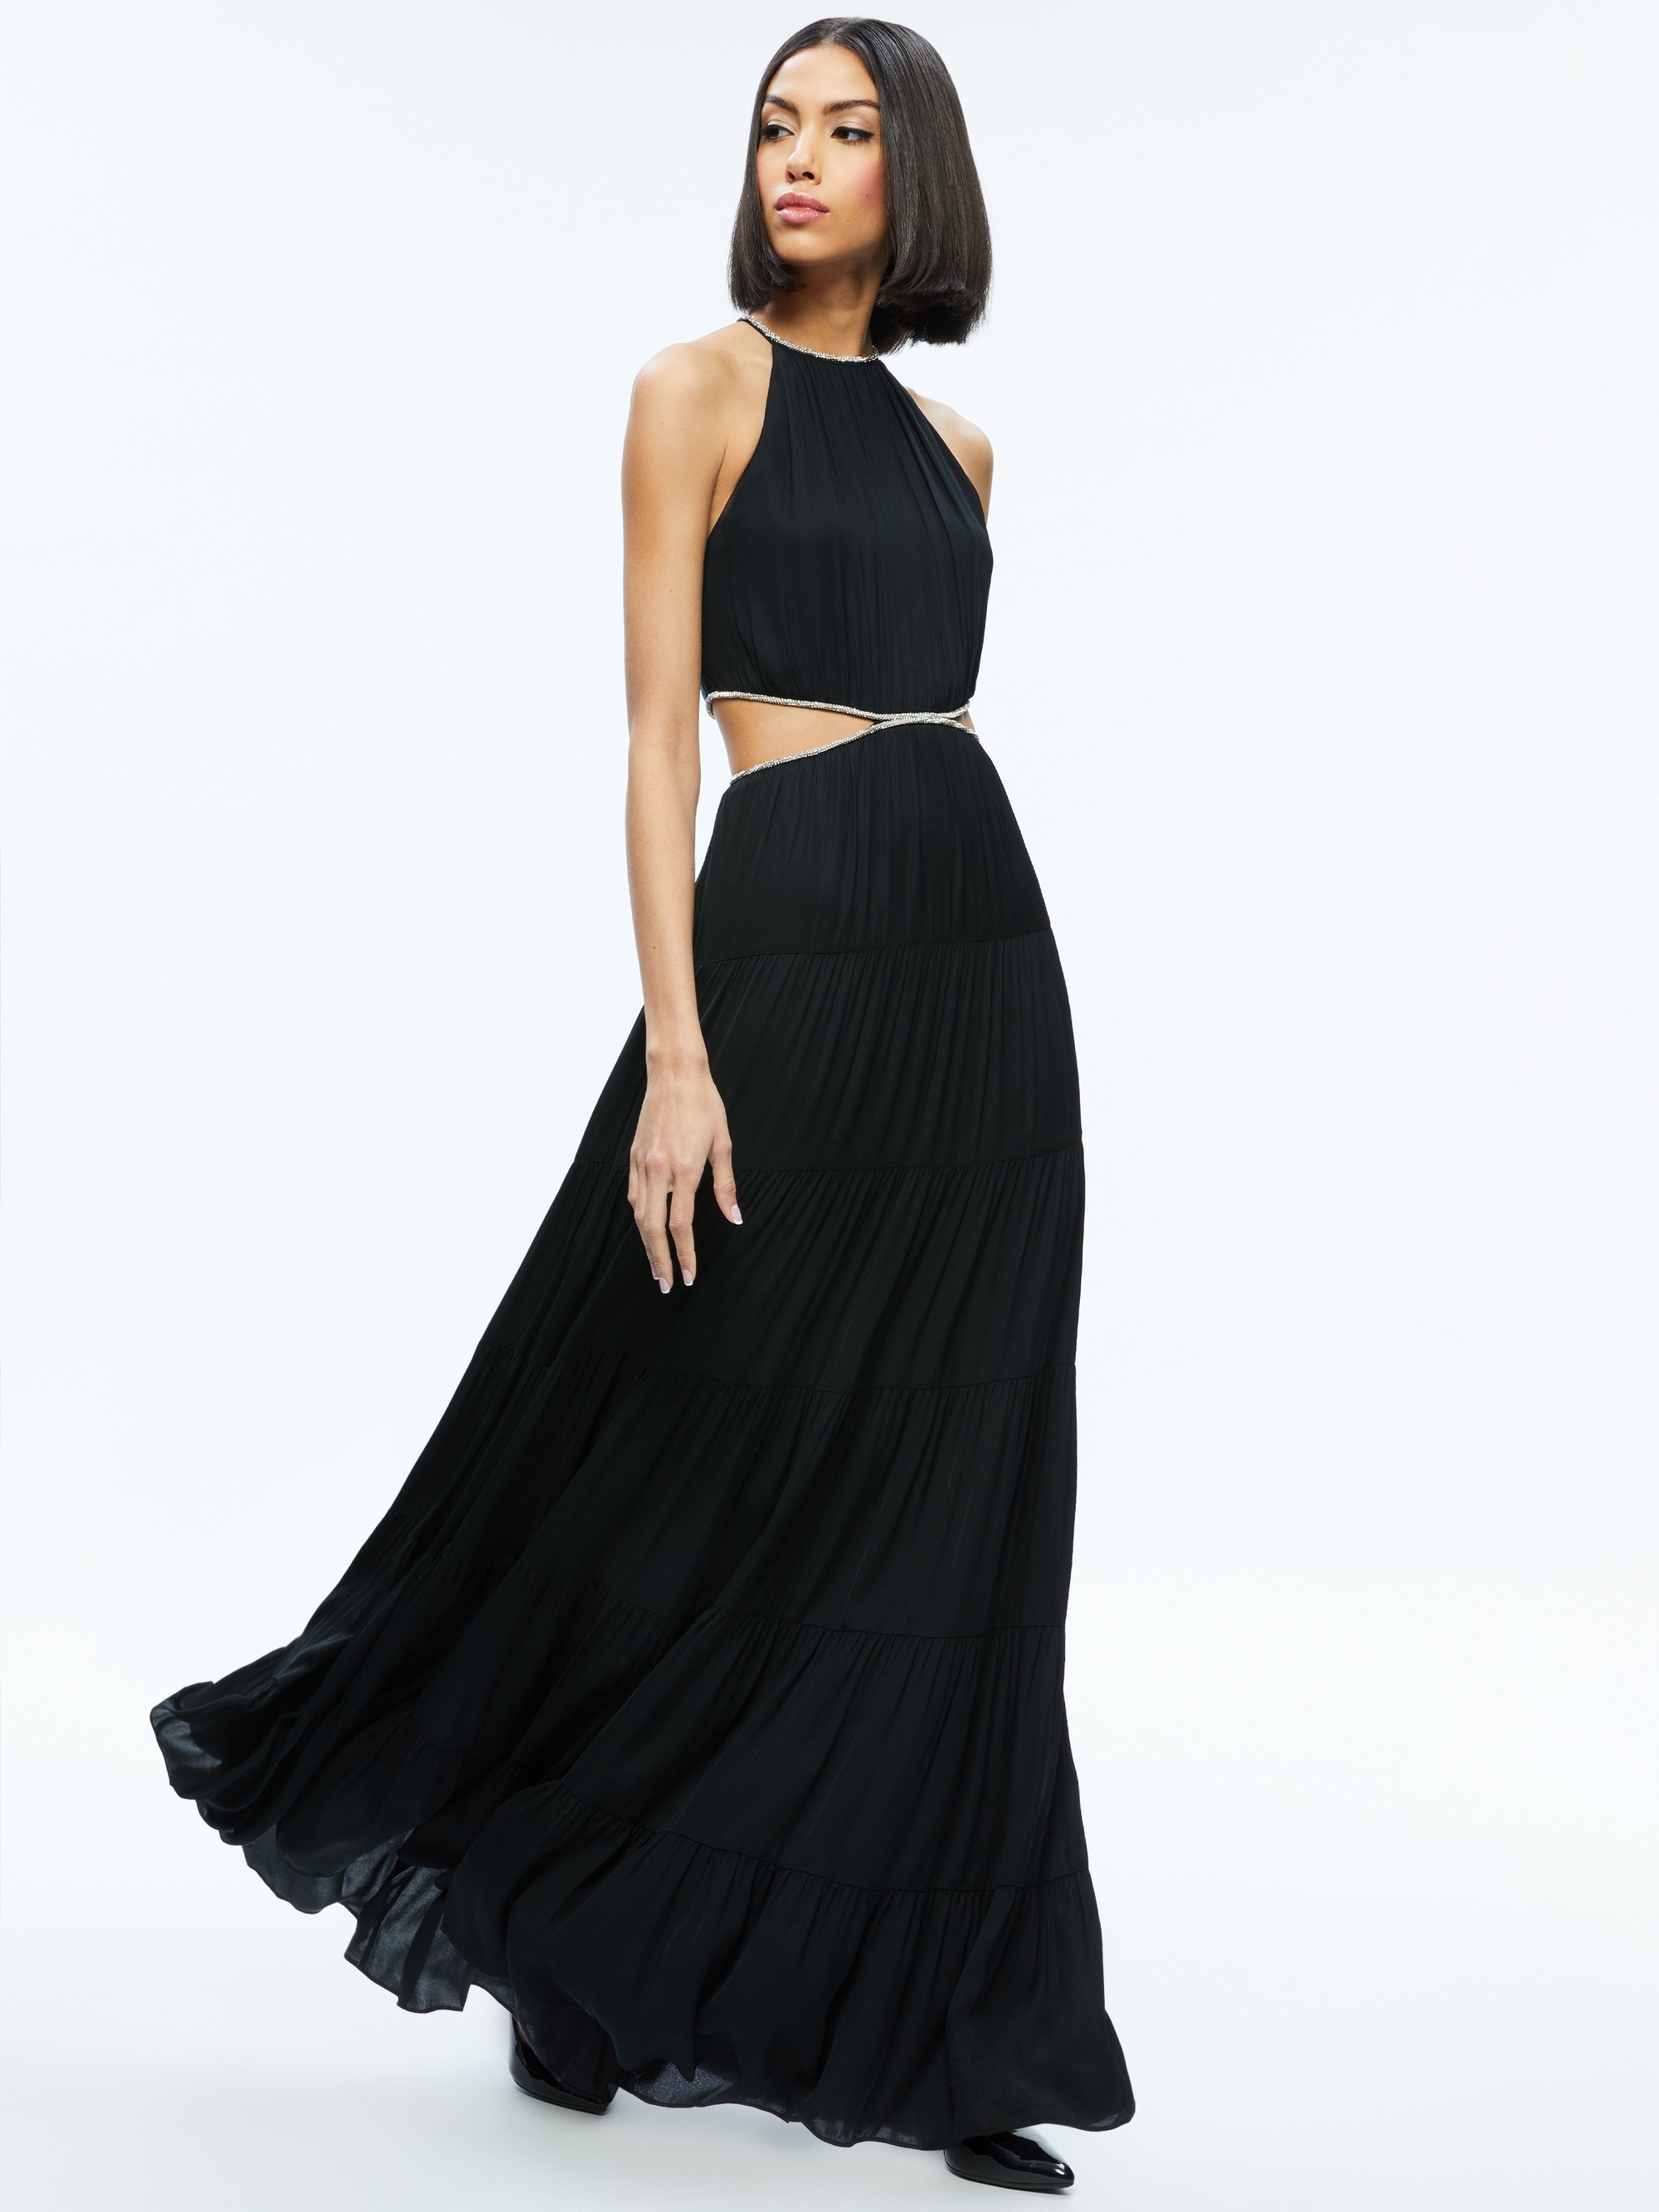 MYRTICE EMBELLISHED CUT OUT MAXI DRESS - 5